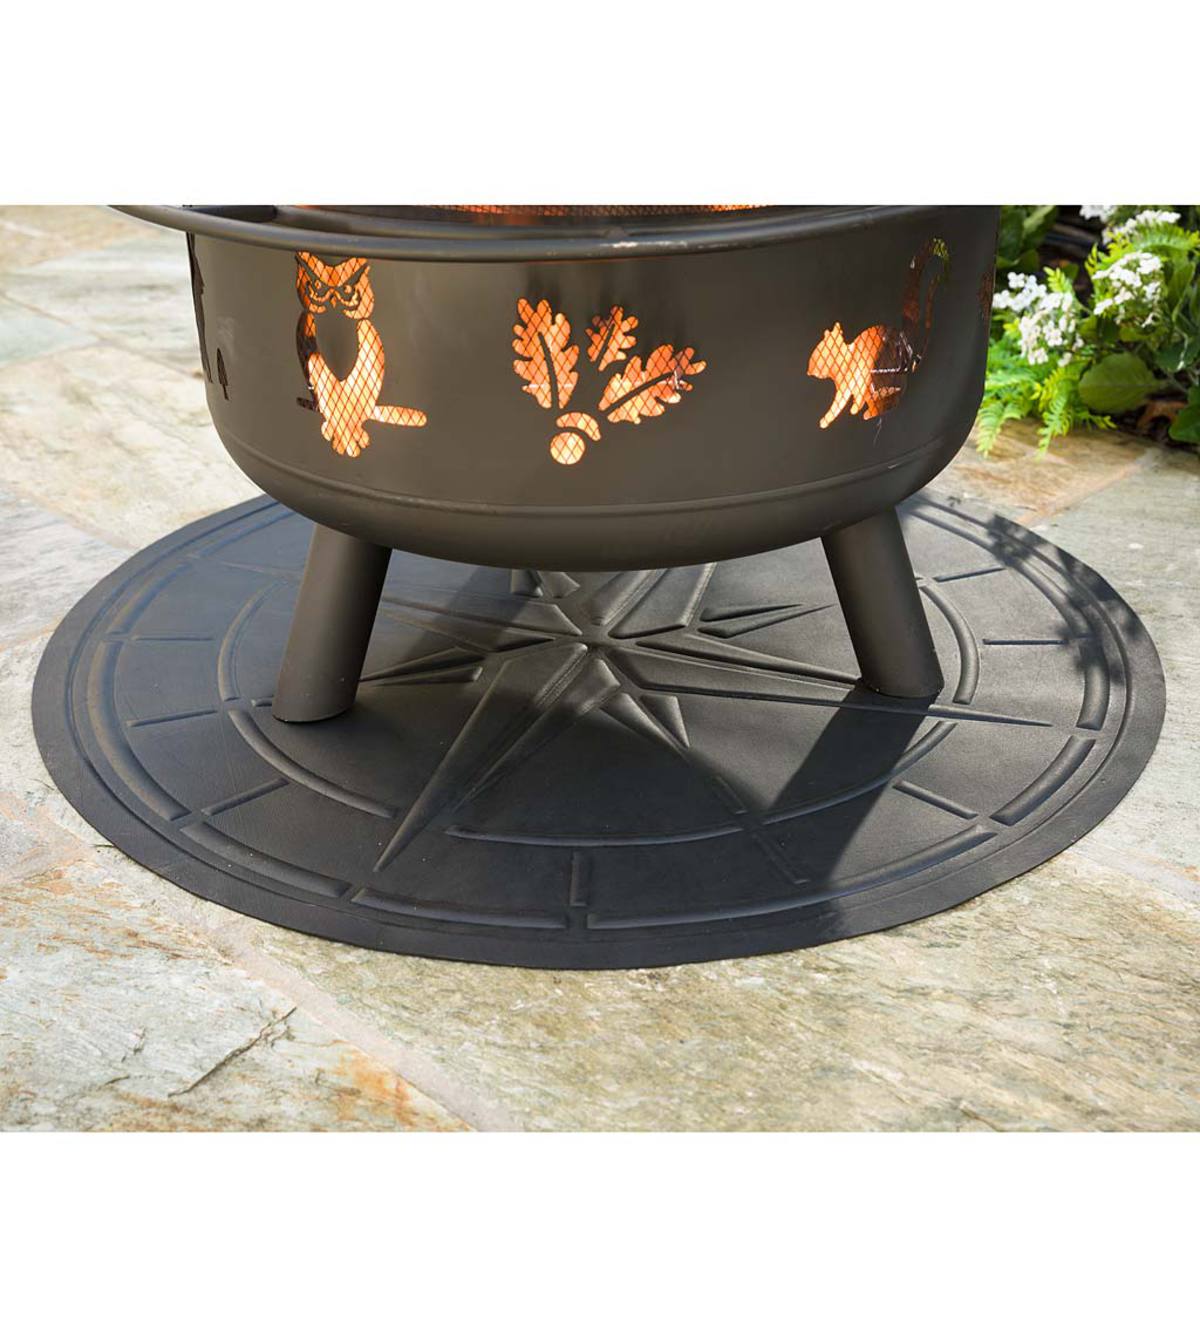 Flame-Resistant Protective Mat For Fire Pit and Grill, Compass Design